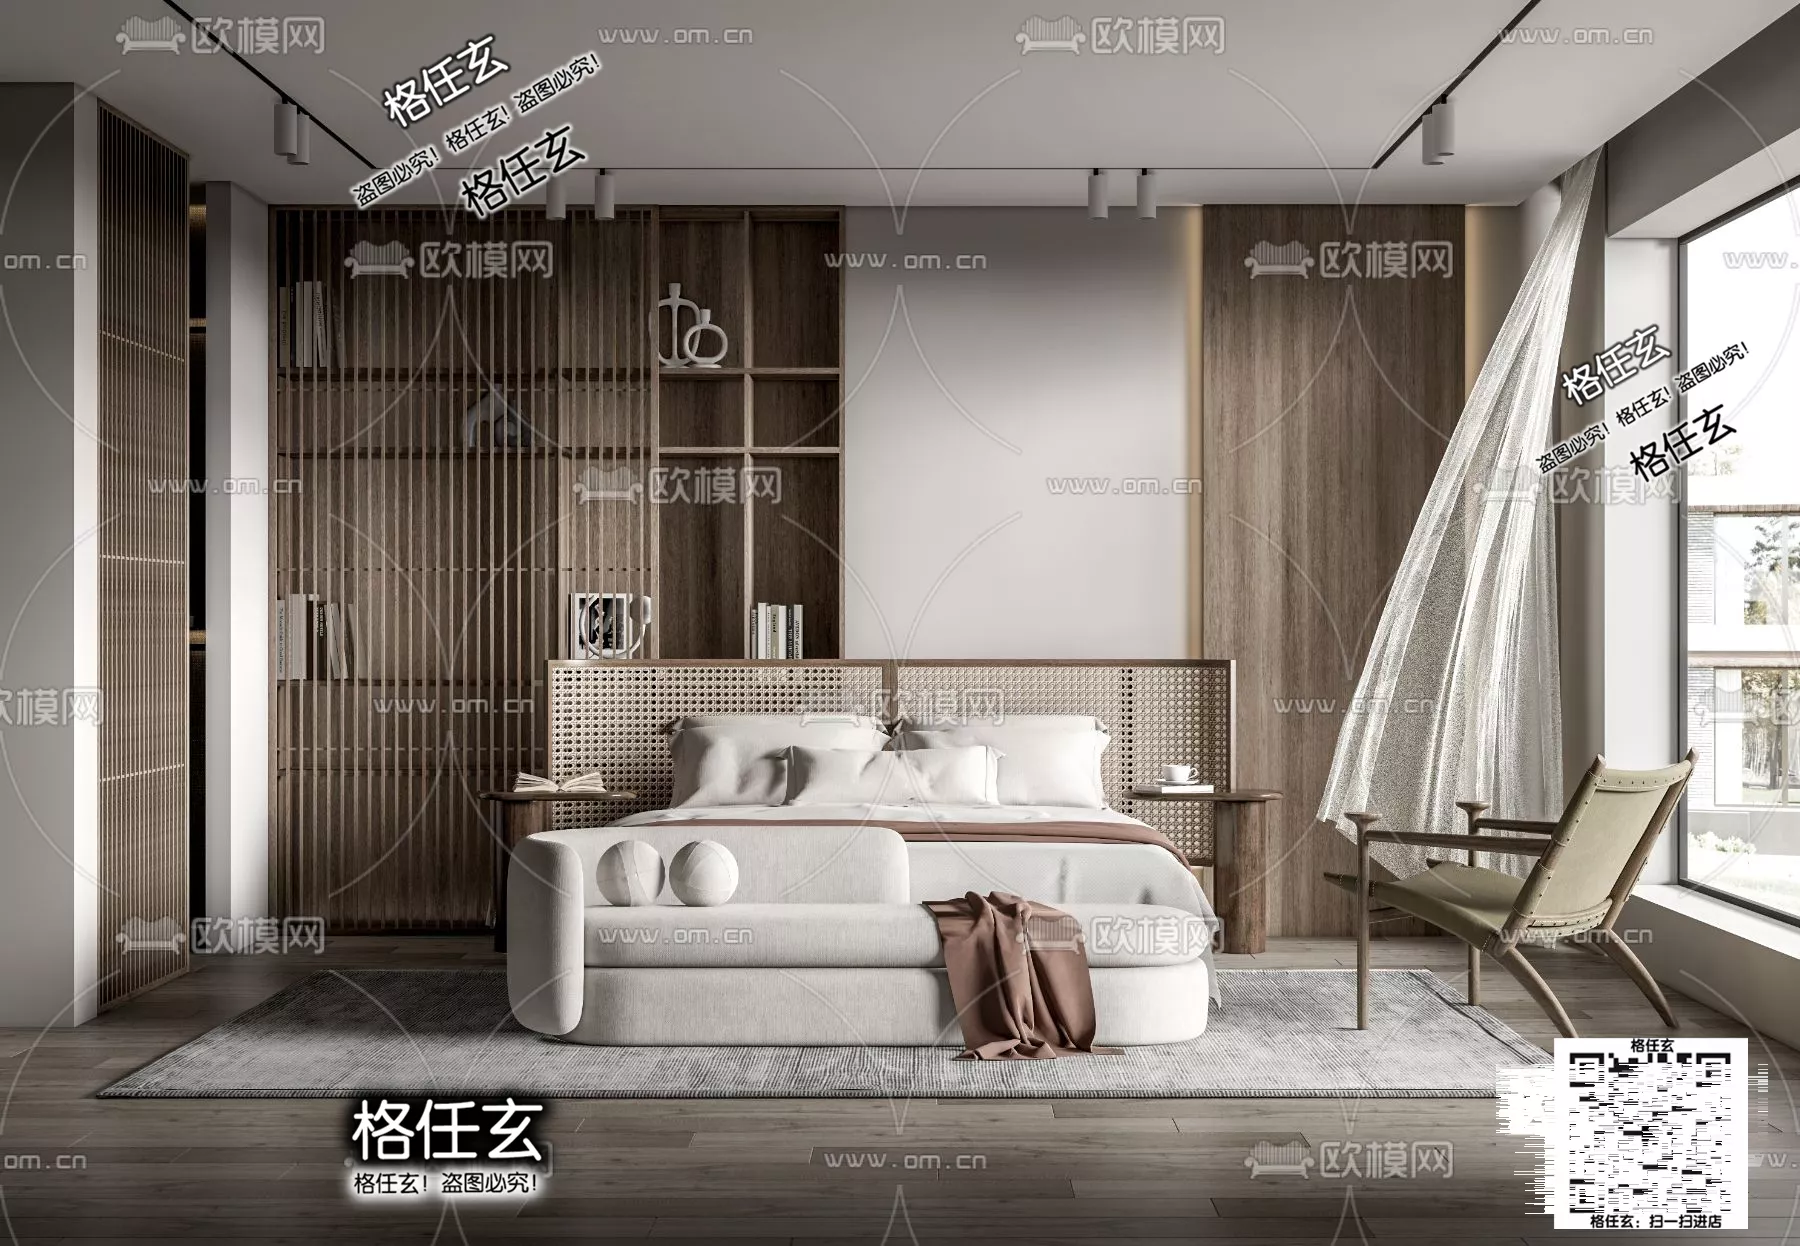 WABI SABI INTERIOR COLLECTION - SKETCHUP 3D SCENE - VRAY OR ENSCAPE - ID17786